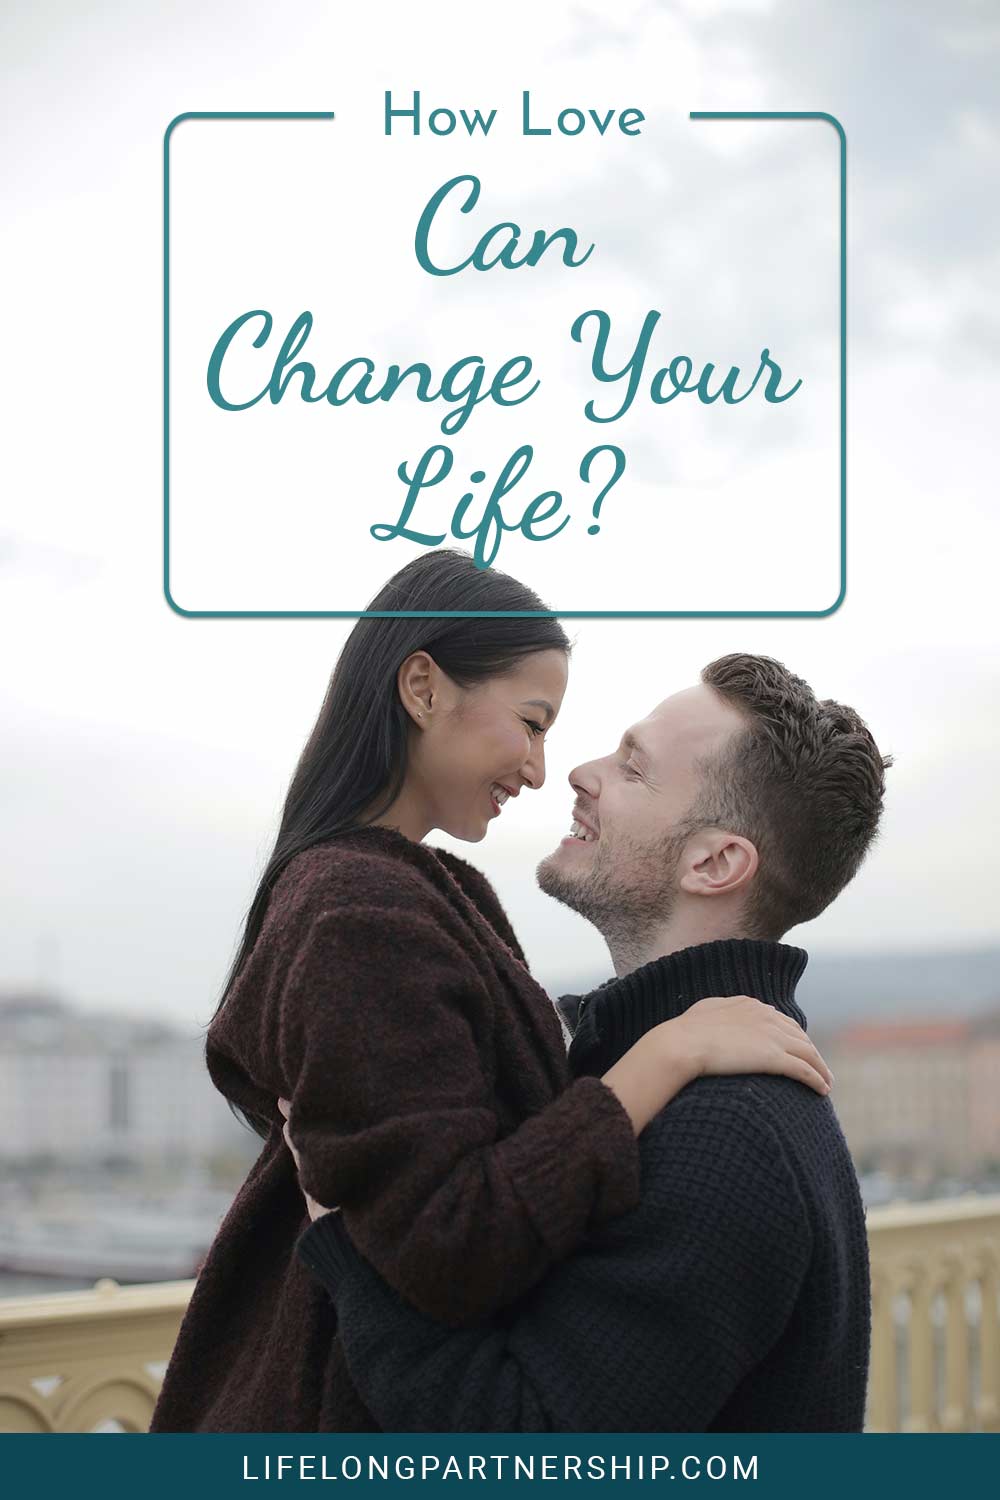 How Love Can Change Your Life?